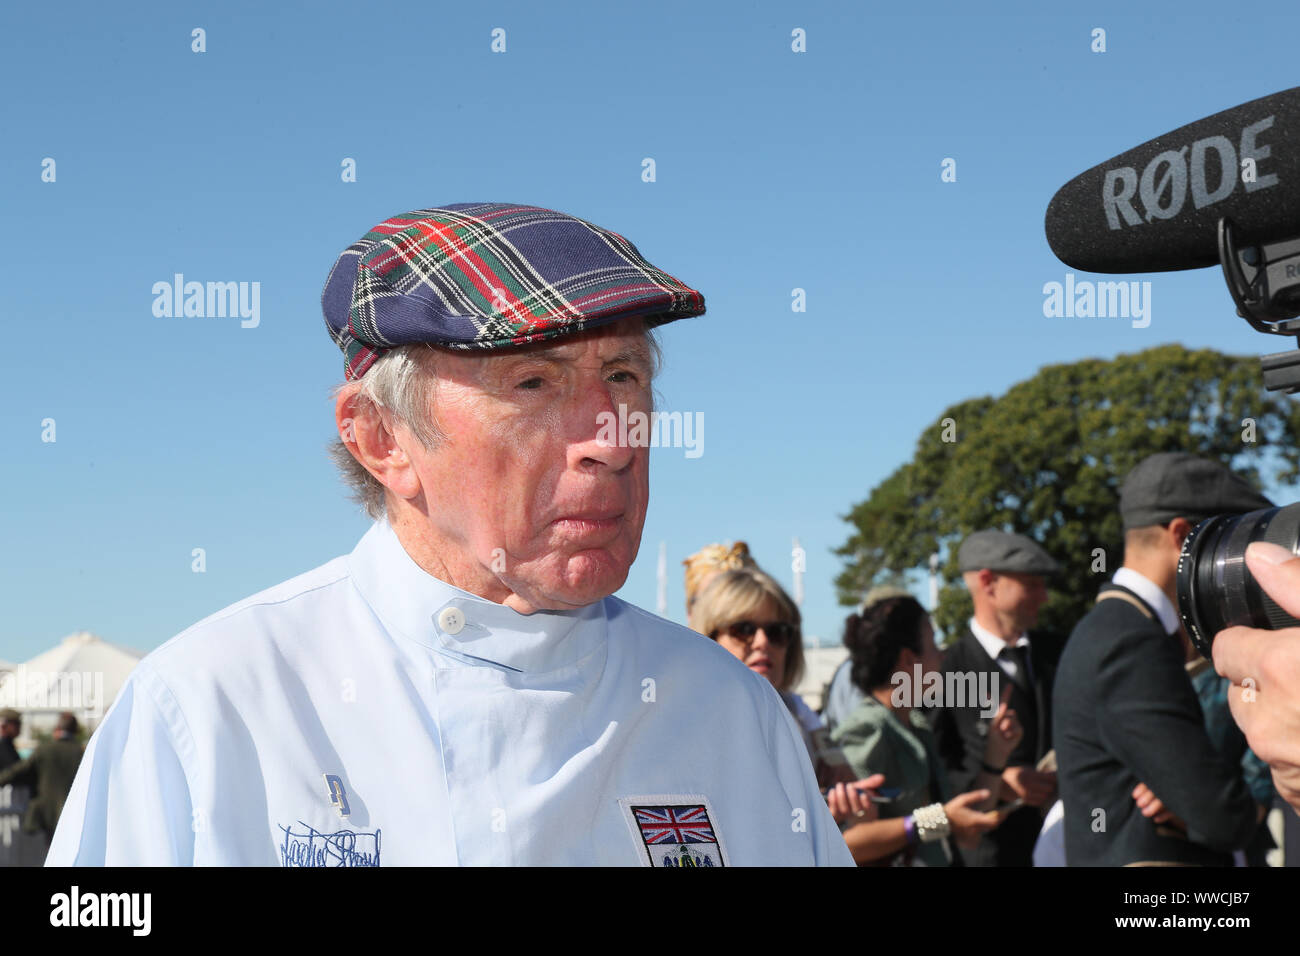 Goodwood, West Sussex, Regno Unito. Il 15 settembre 2019. Sir Jackie Stewart al Goodwood a Goodwood, West Sussex, Regno Unito. © Malcolm Greig/Alamy Live News Foto Stock